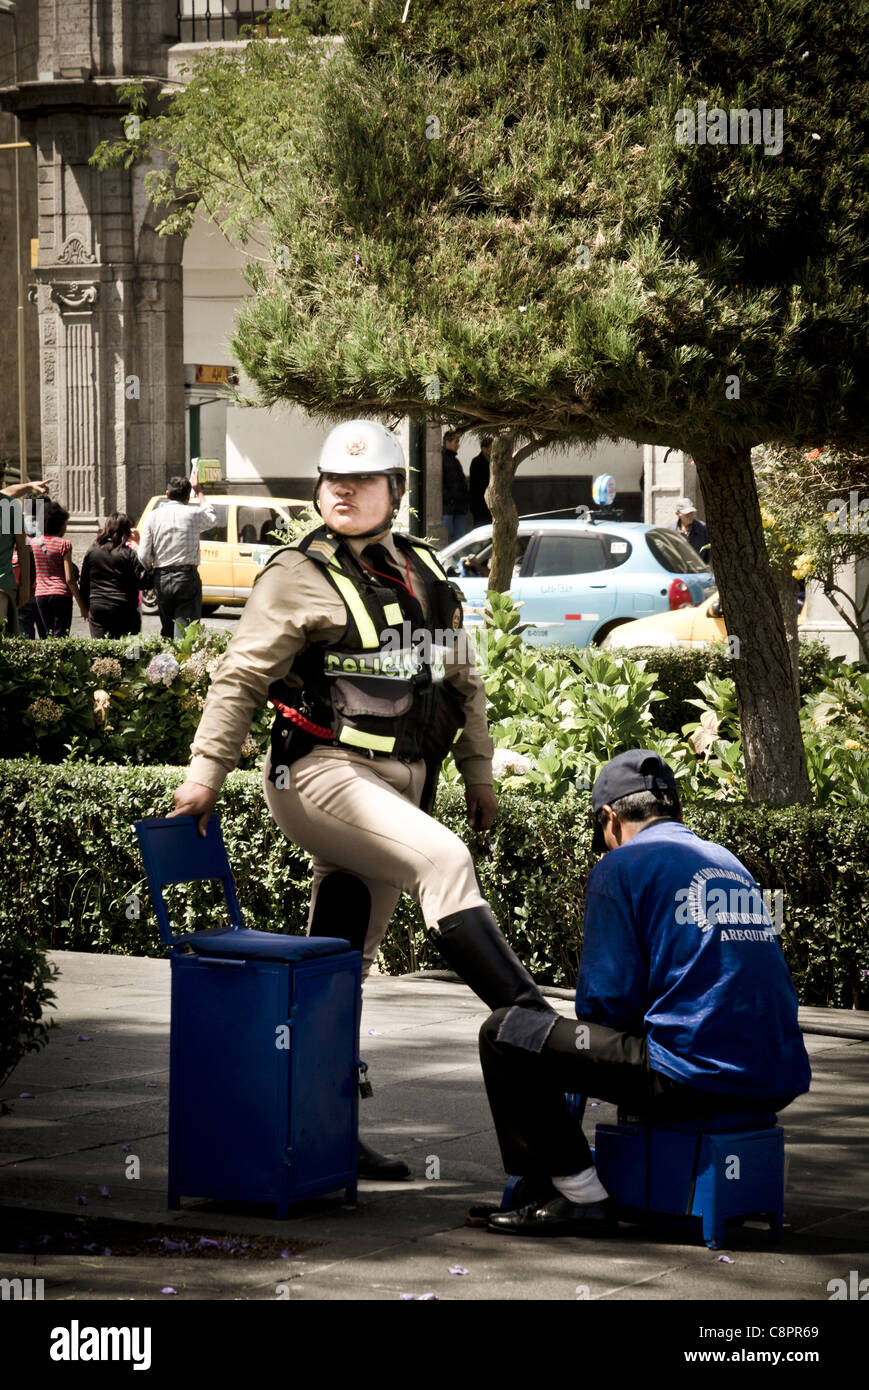 Police woman and street shoe shiner in Arequipa Peru Stock Photo